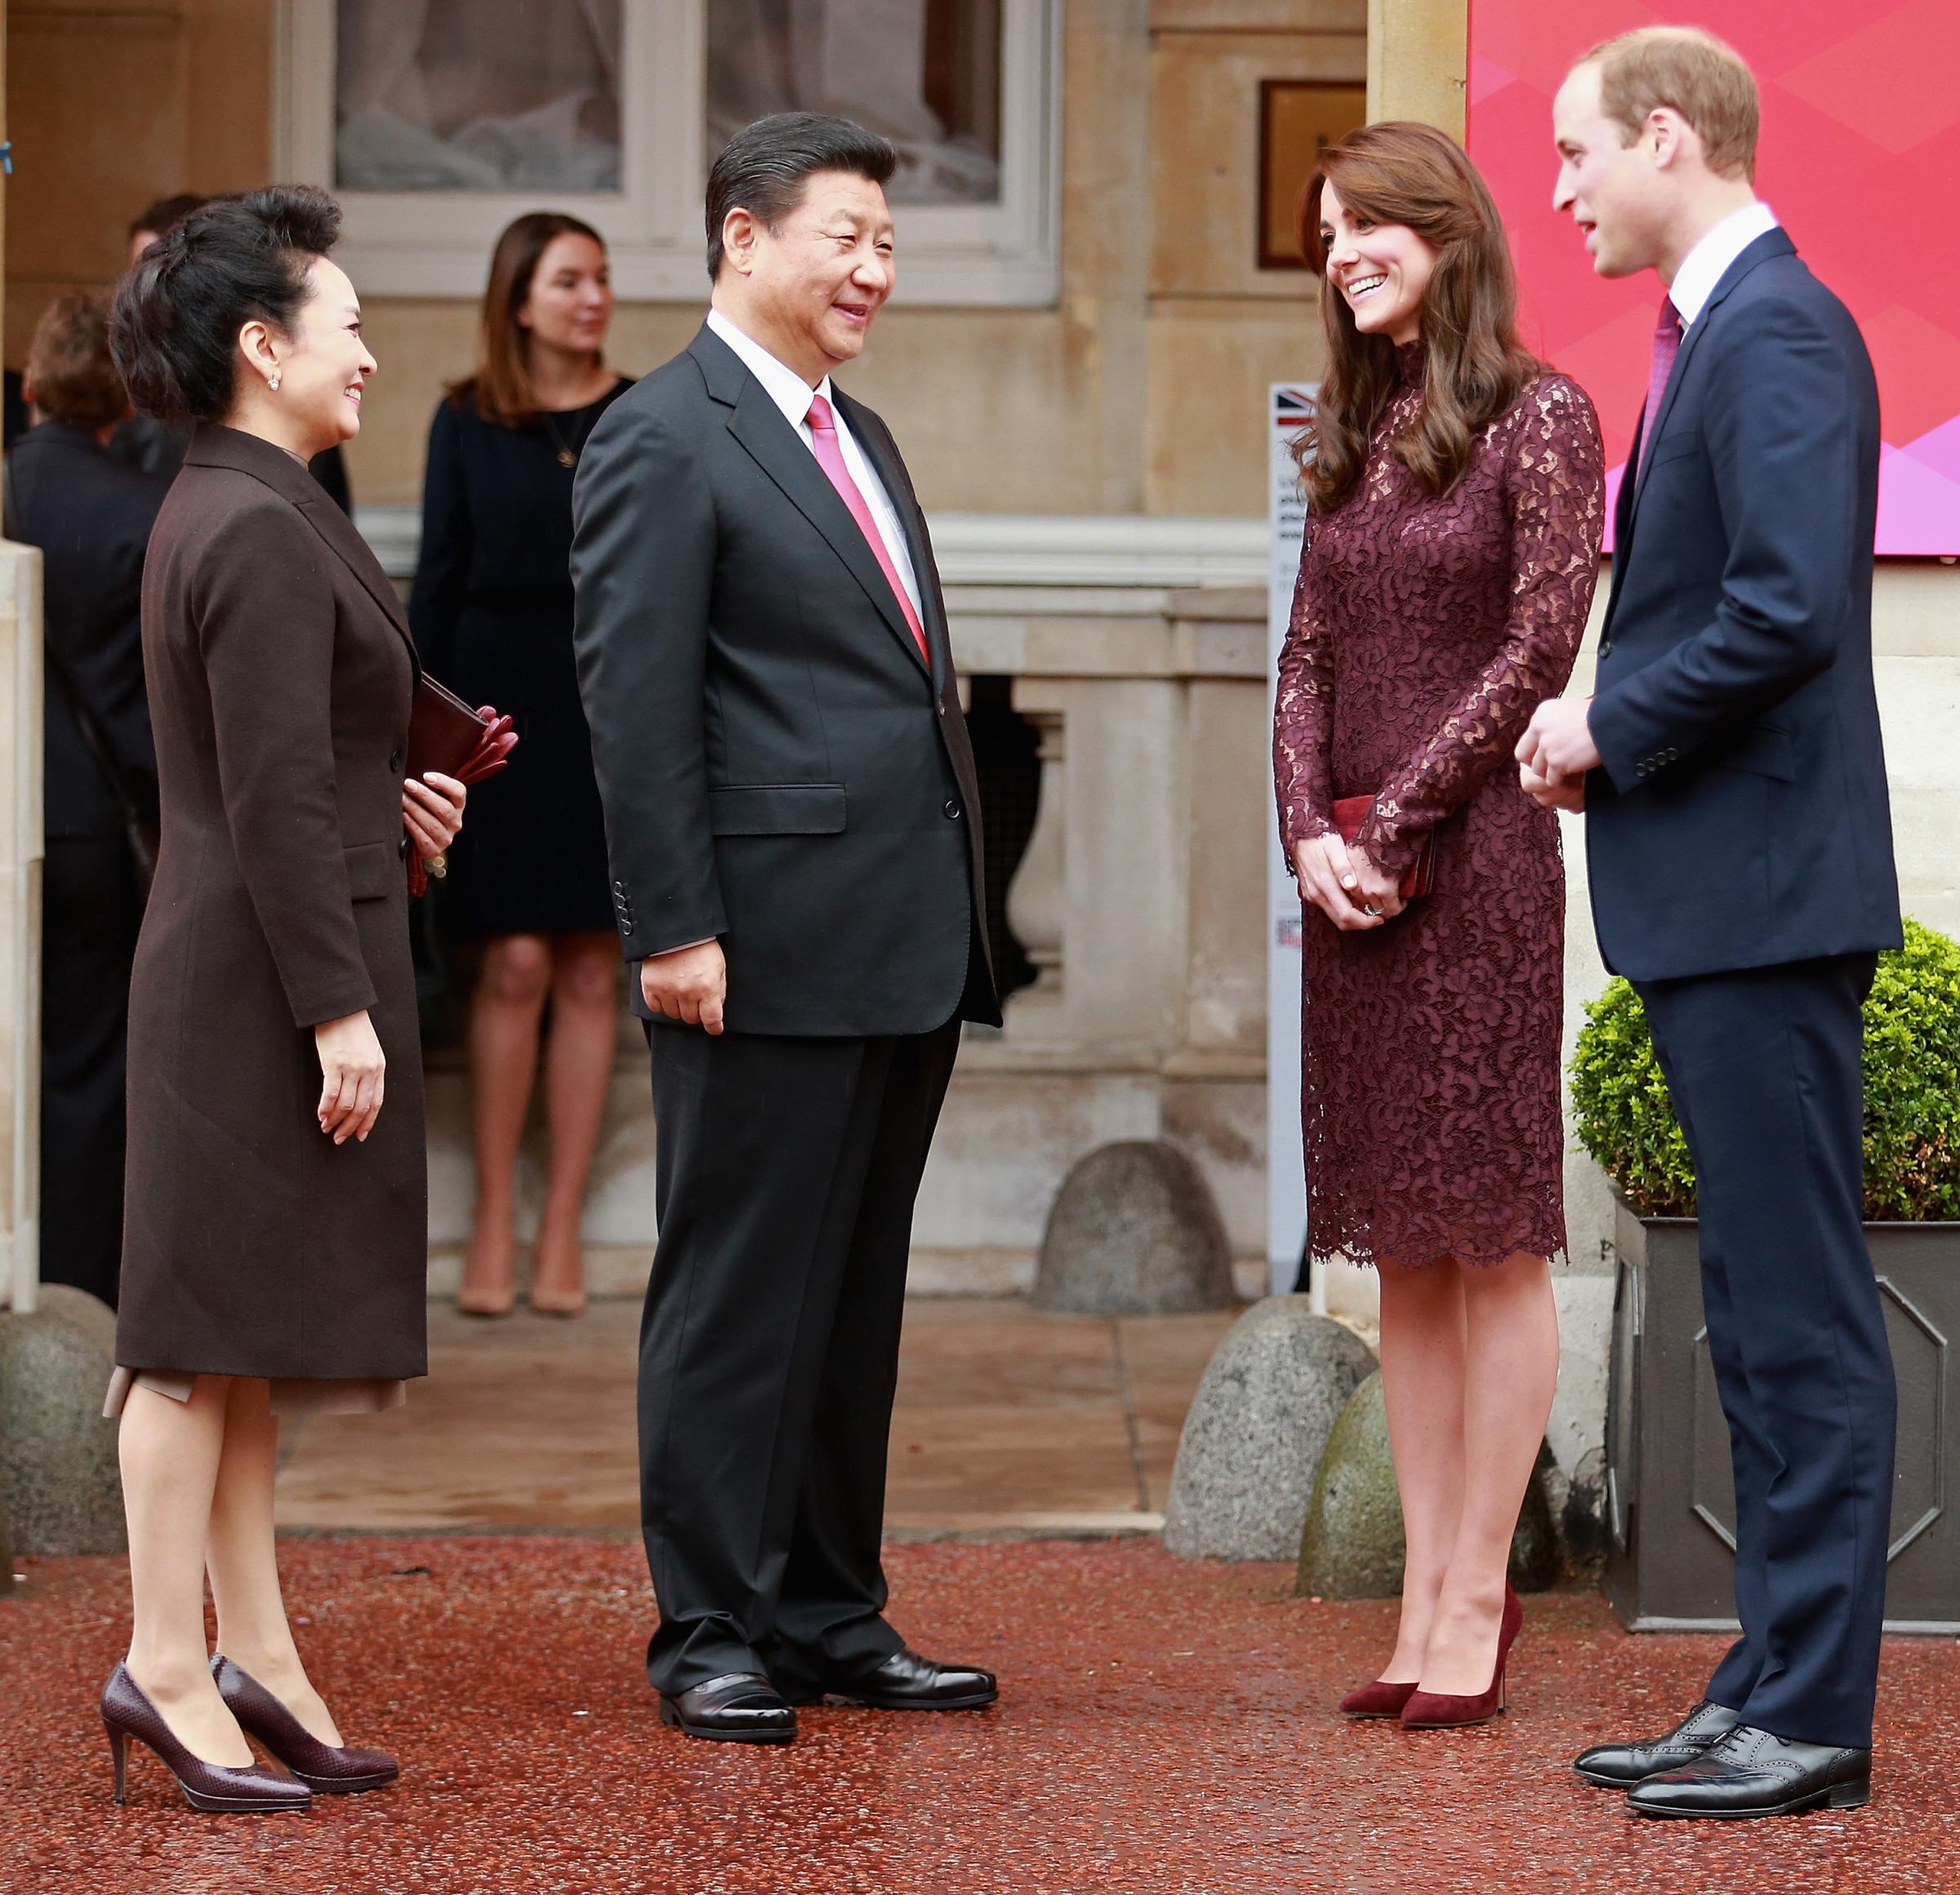 State Visit Of The President Of The People's Republic Of China - Day 3